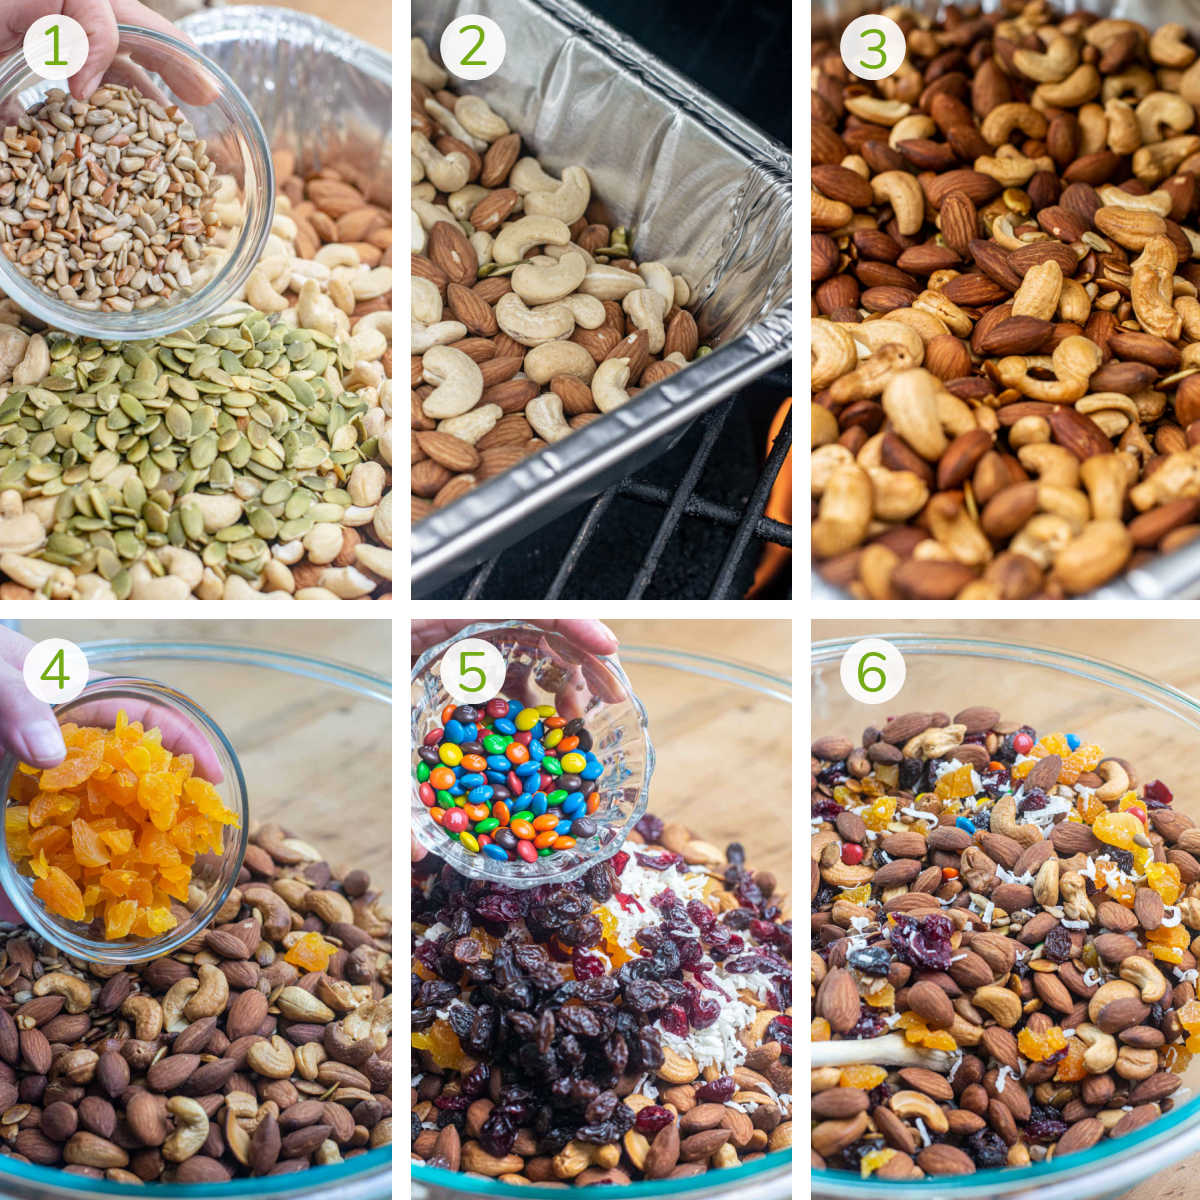 instruction photos showing mixing the seeds and nuts, smoking them, adding in dried fruit, chocolate and mixing.